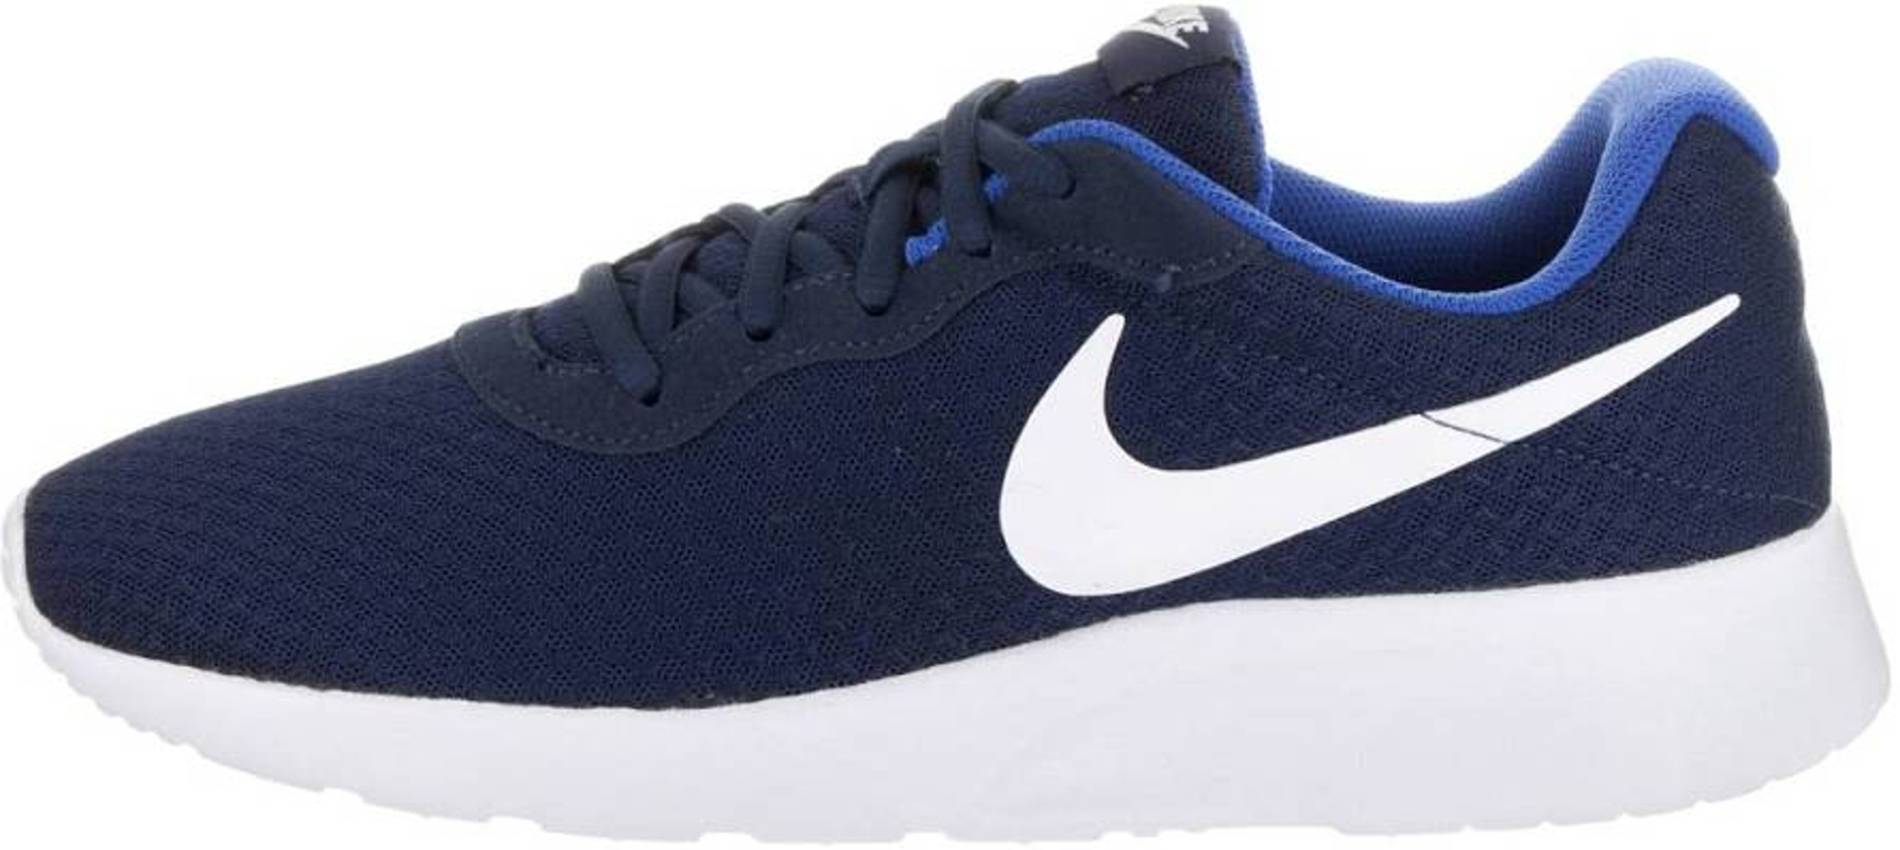 Save 43% on Blue Nike Sneakers (136 